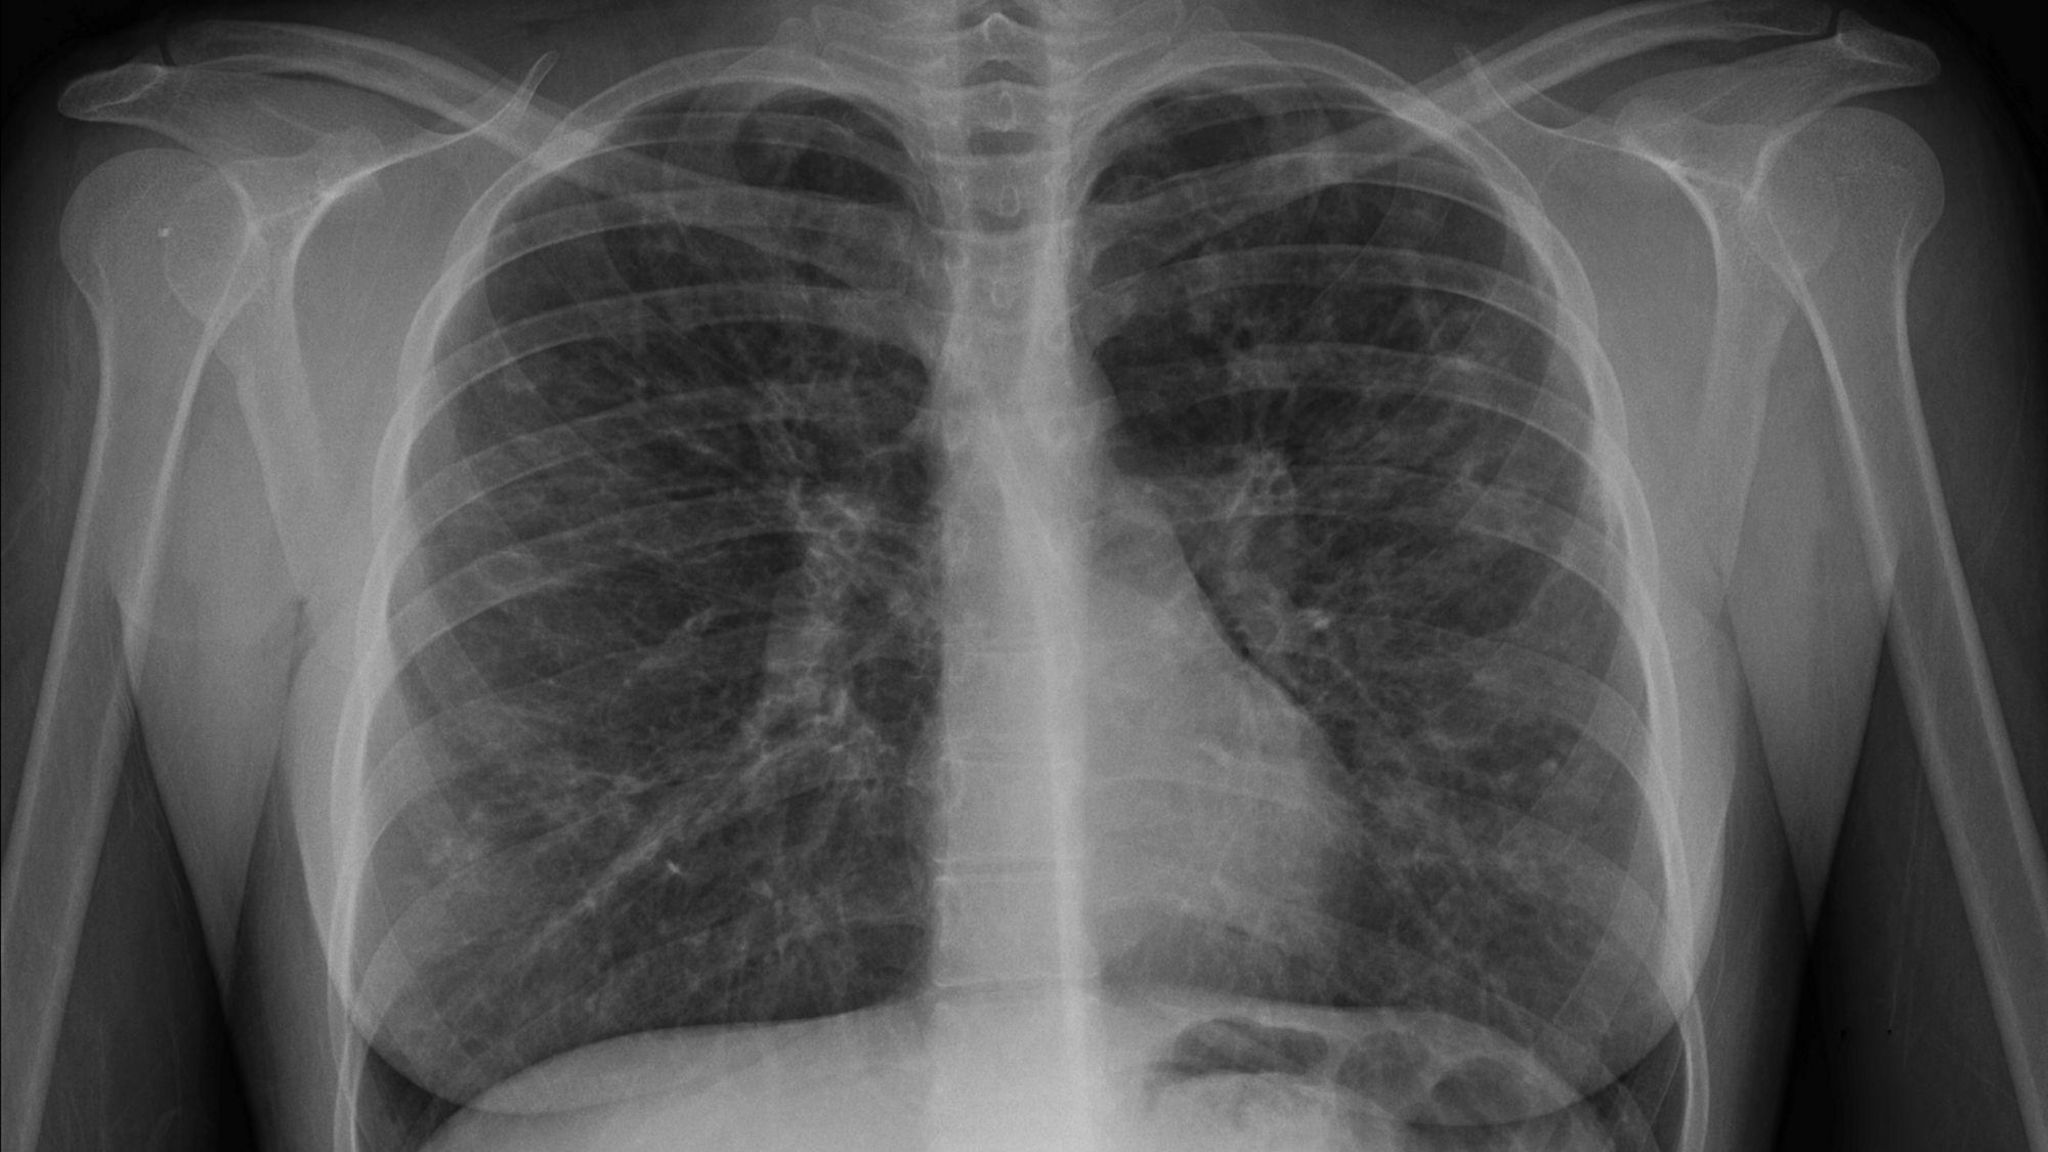 An X-Ray image of someone with cystic fibrosis